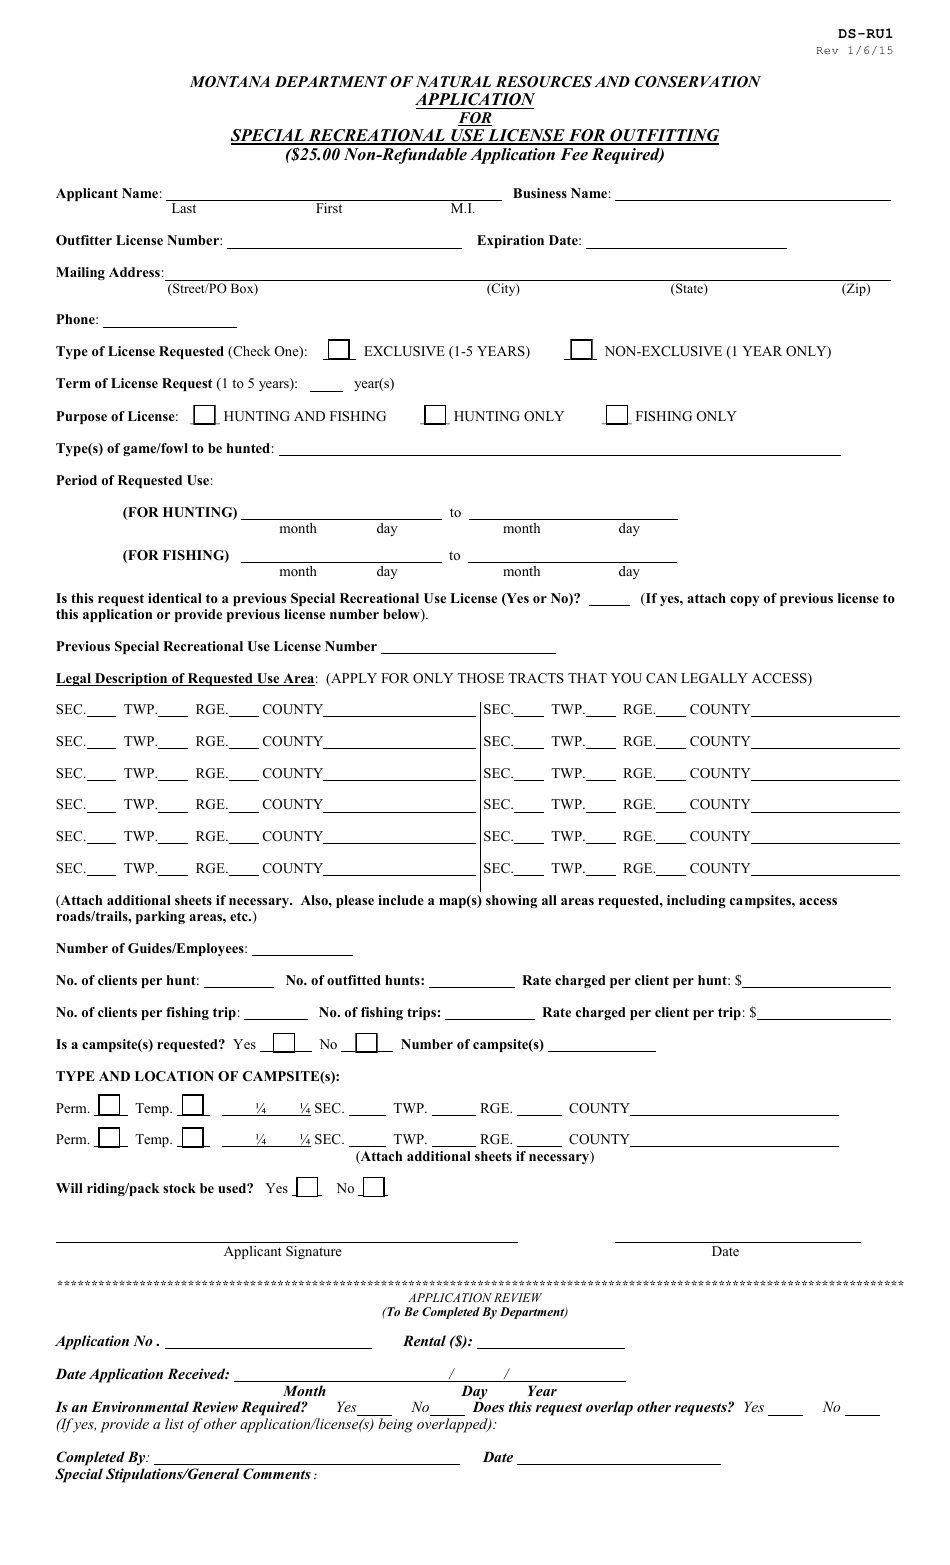 Form DS-RU1 Application for Special Recreational Use License for Outfitting - Montana, Page 1